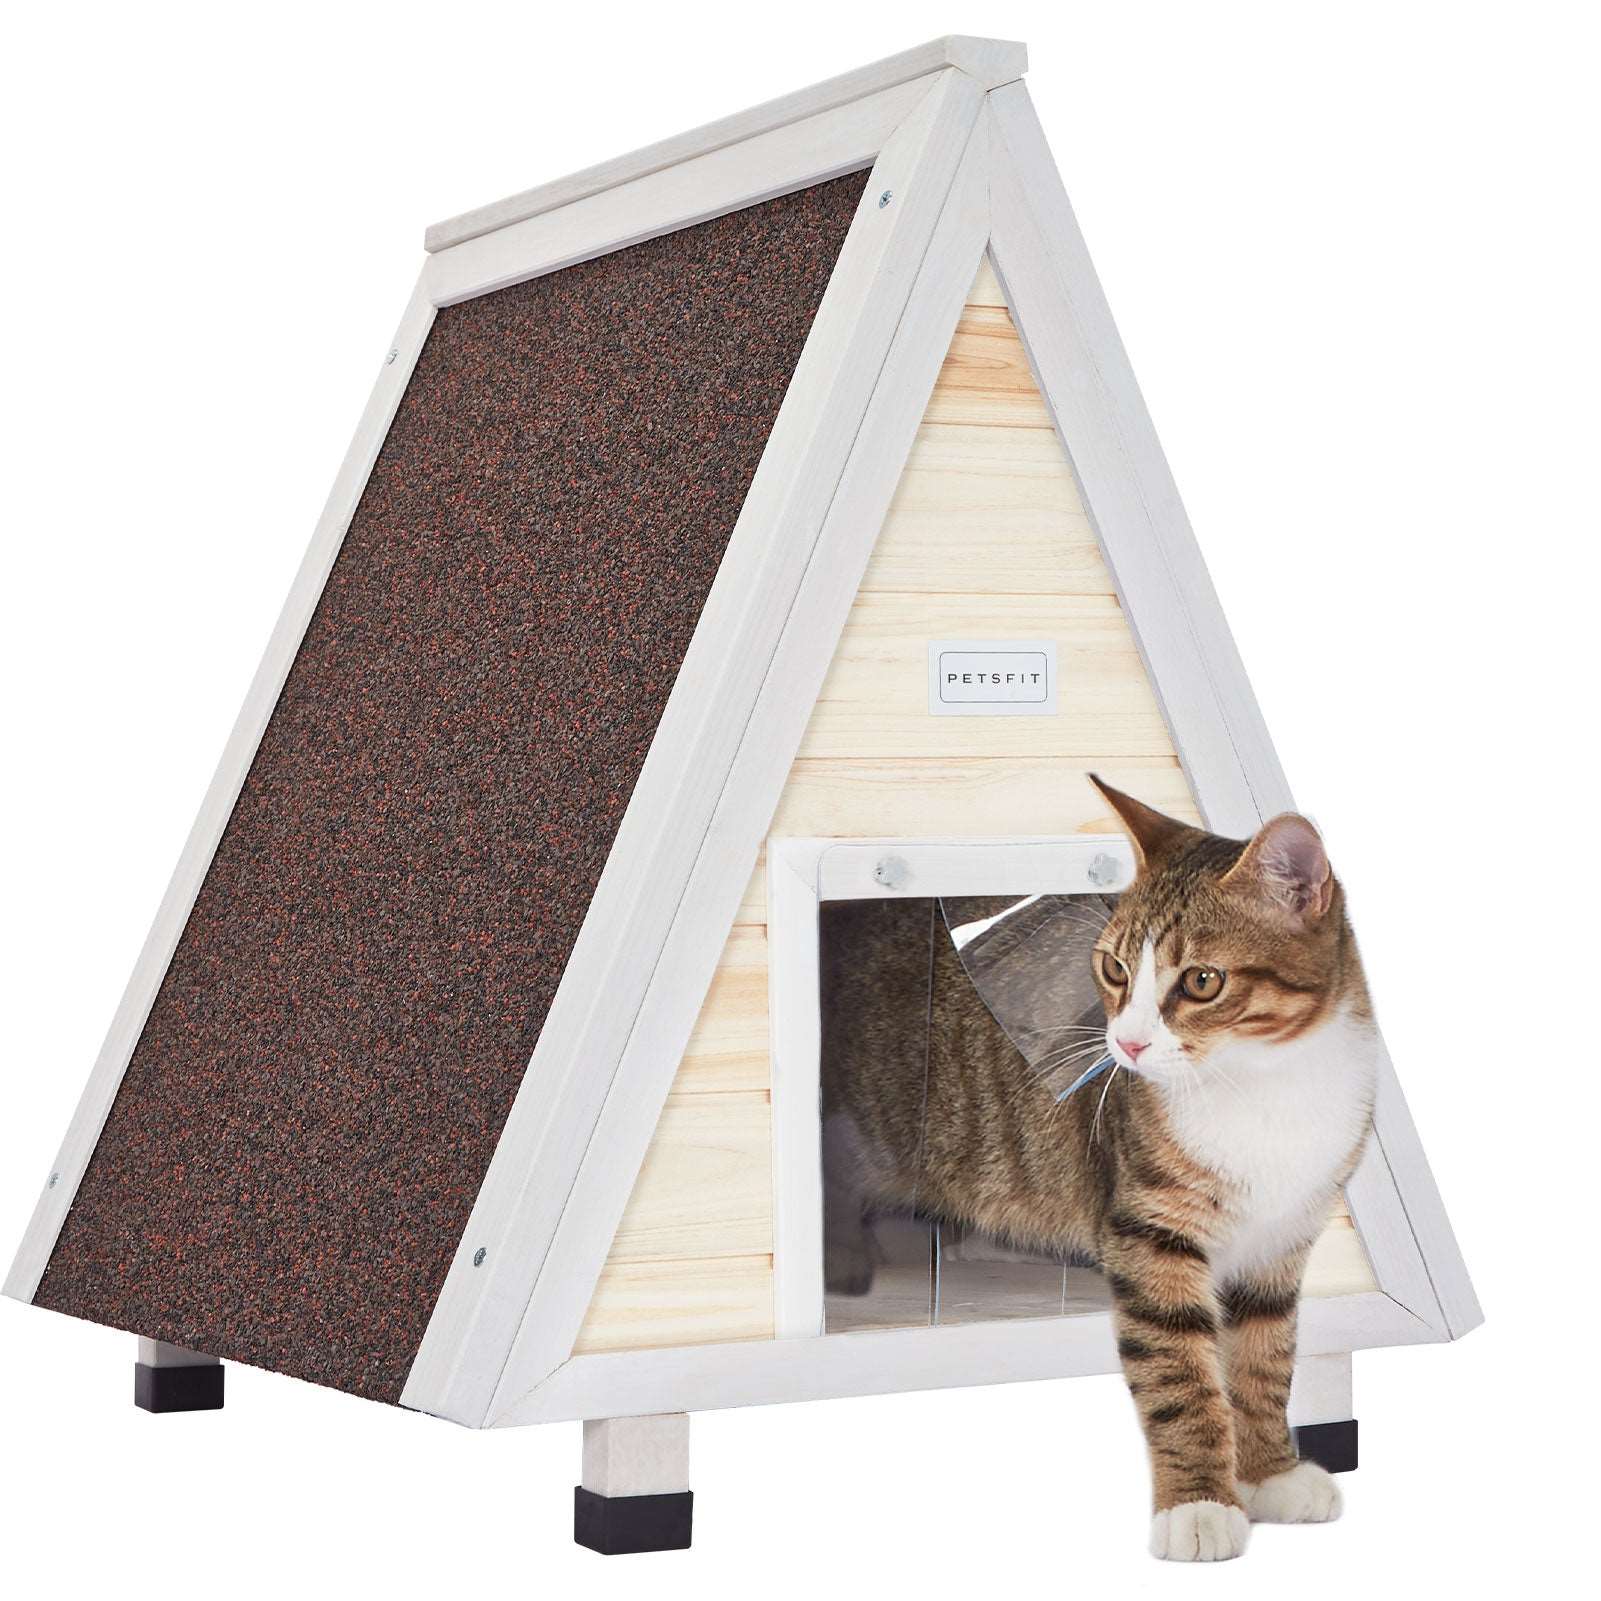 PETSFIT-Single-Story-Triangular-Cat-House-With-Foot-Stand-10